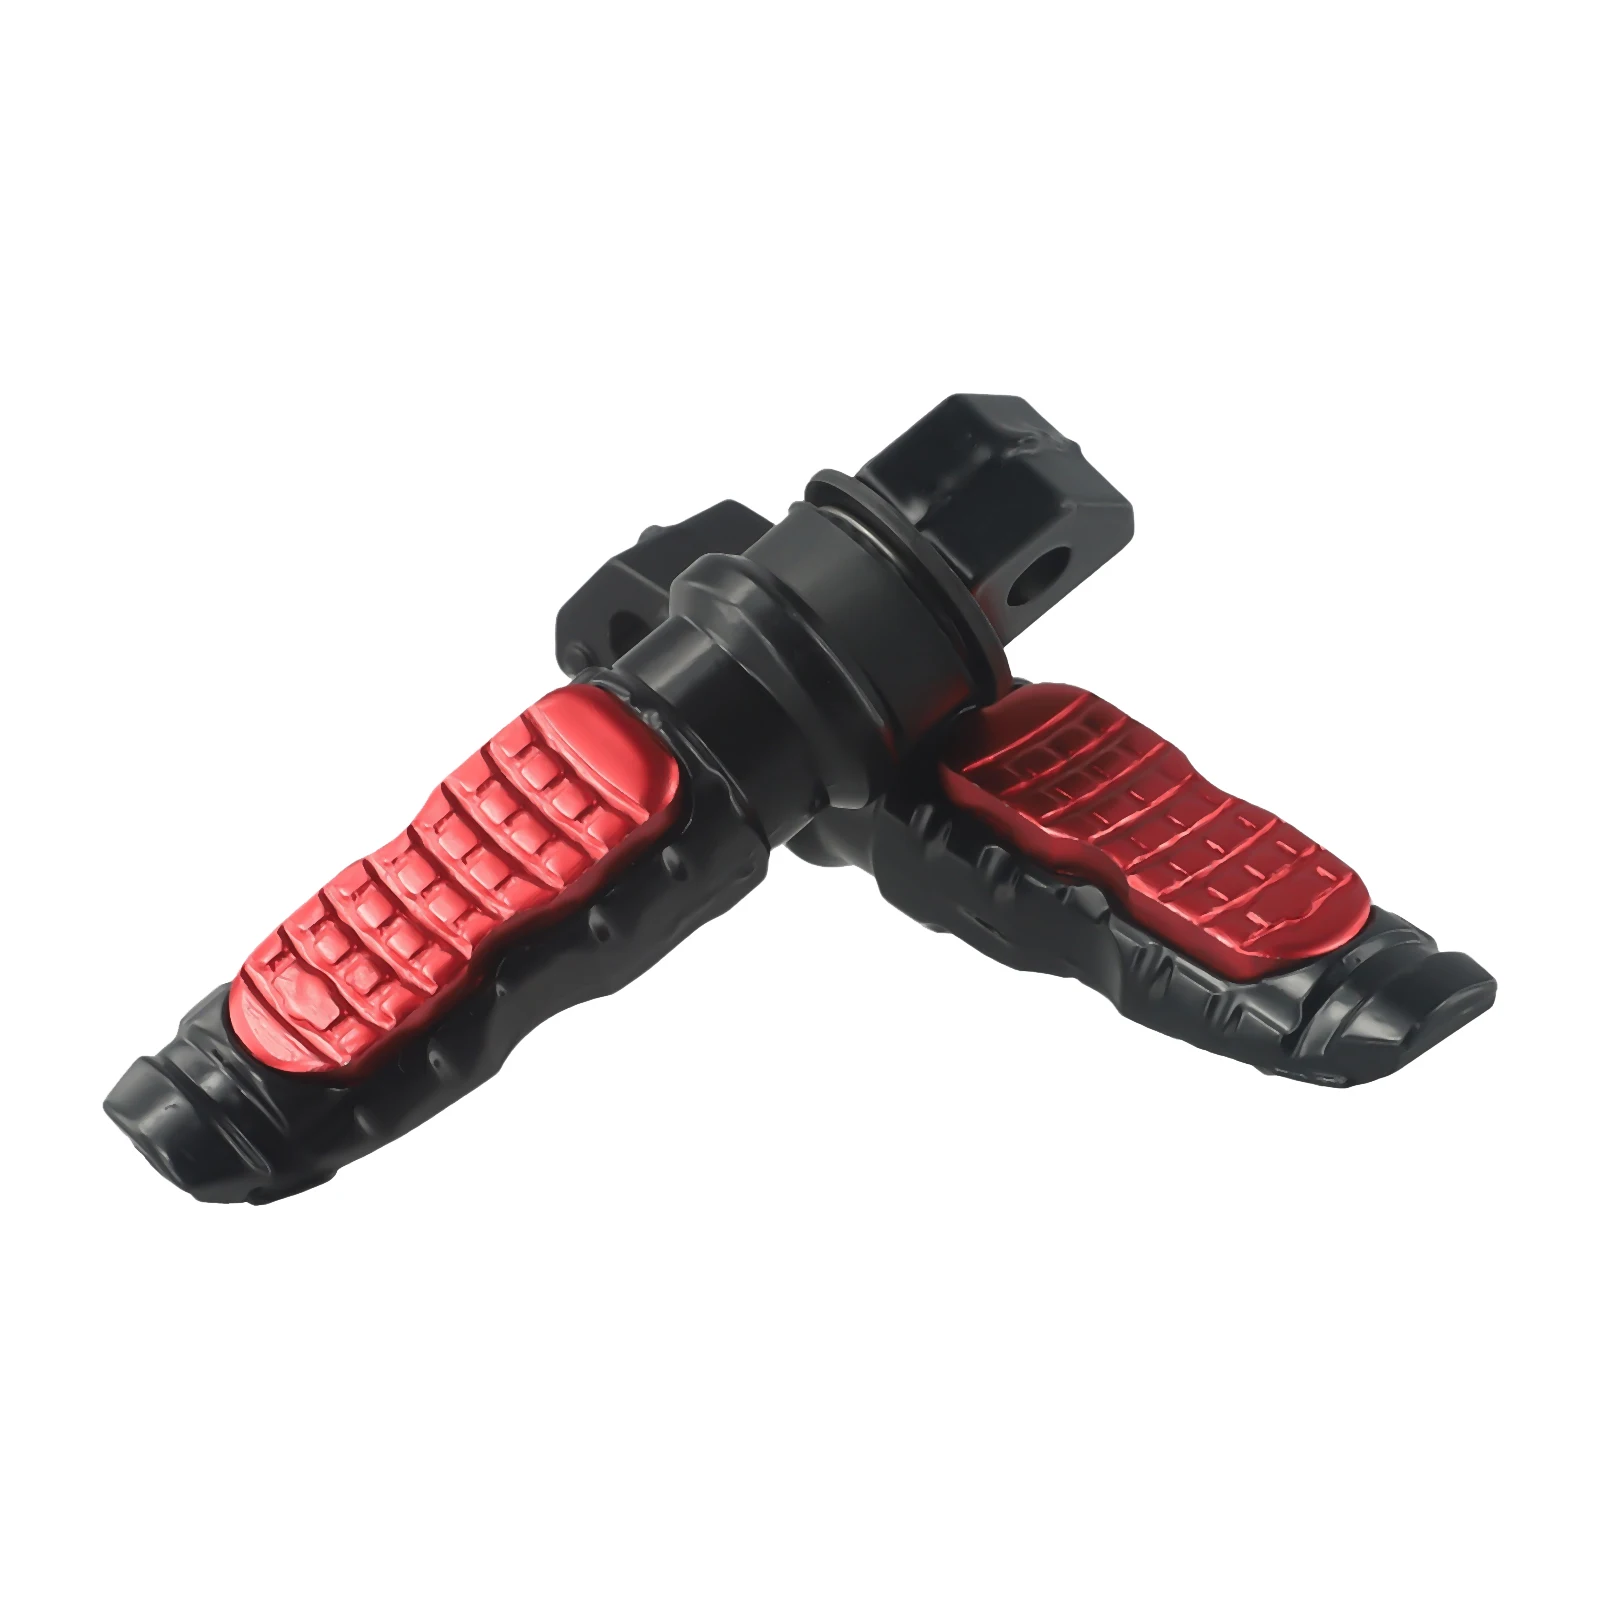 Foot Pegs Pedals Foot Peg Rear Pedal Get Your Ride Comfortable 2Pcs Moto... - $17.26